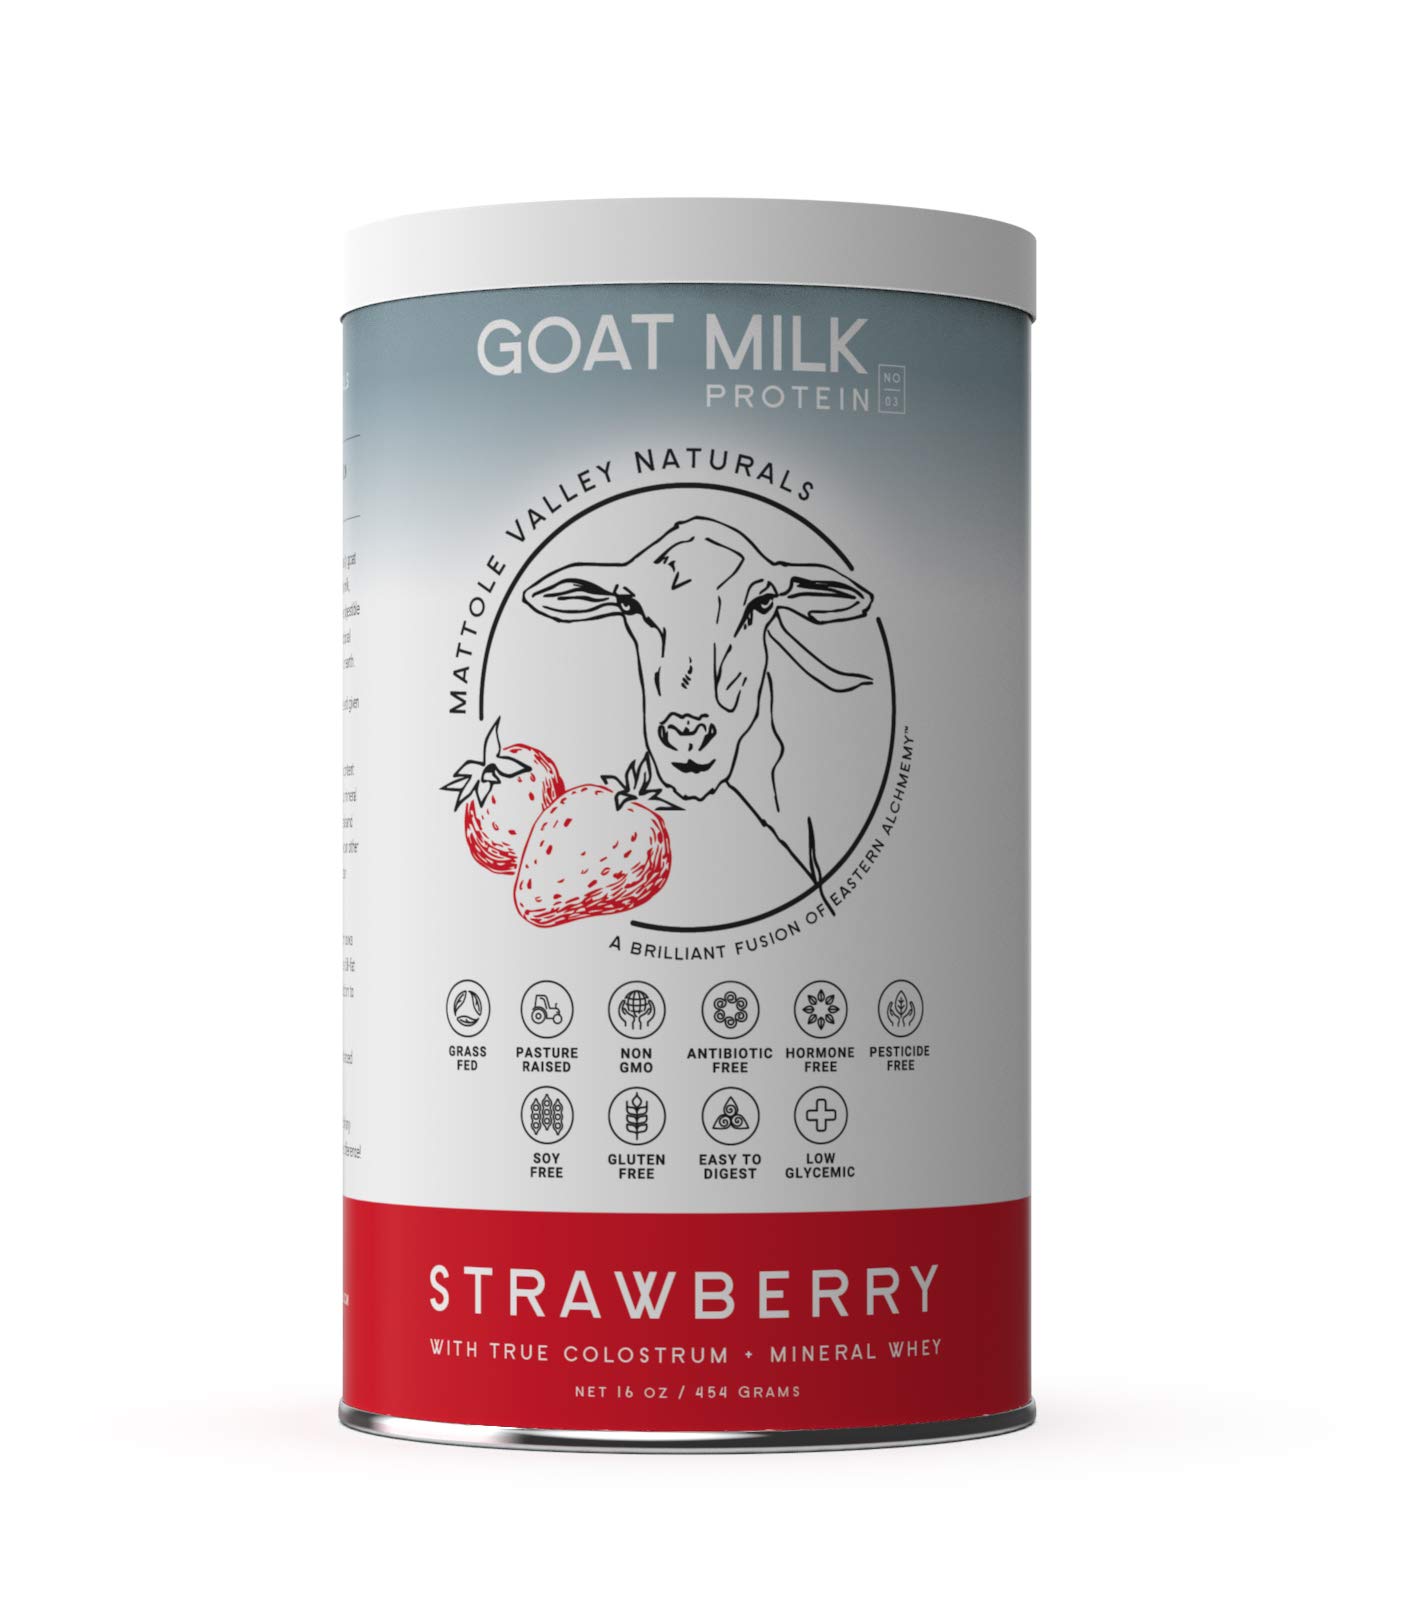 Goat Milk Protein Powder - 16 oz - Pasture-Fed - Strawberry - Gluten-Free with Probiotics and Xylitol - Natural Digestive Enzymes, Vitamin D